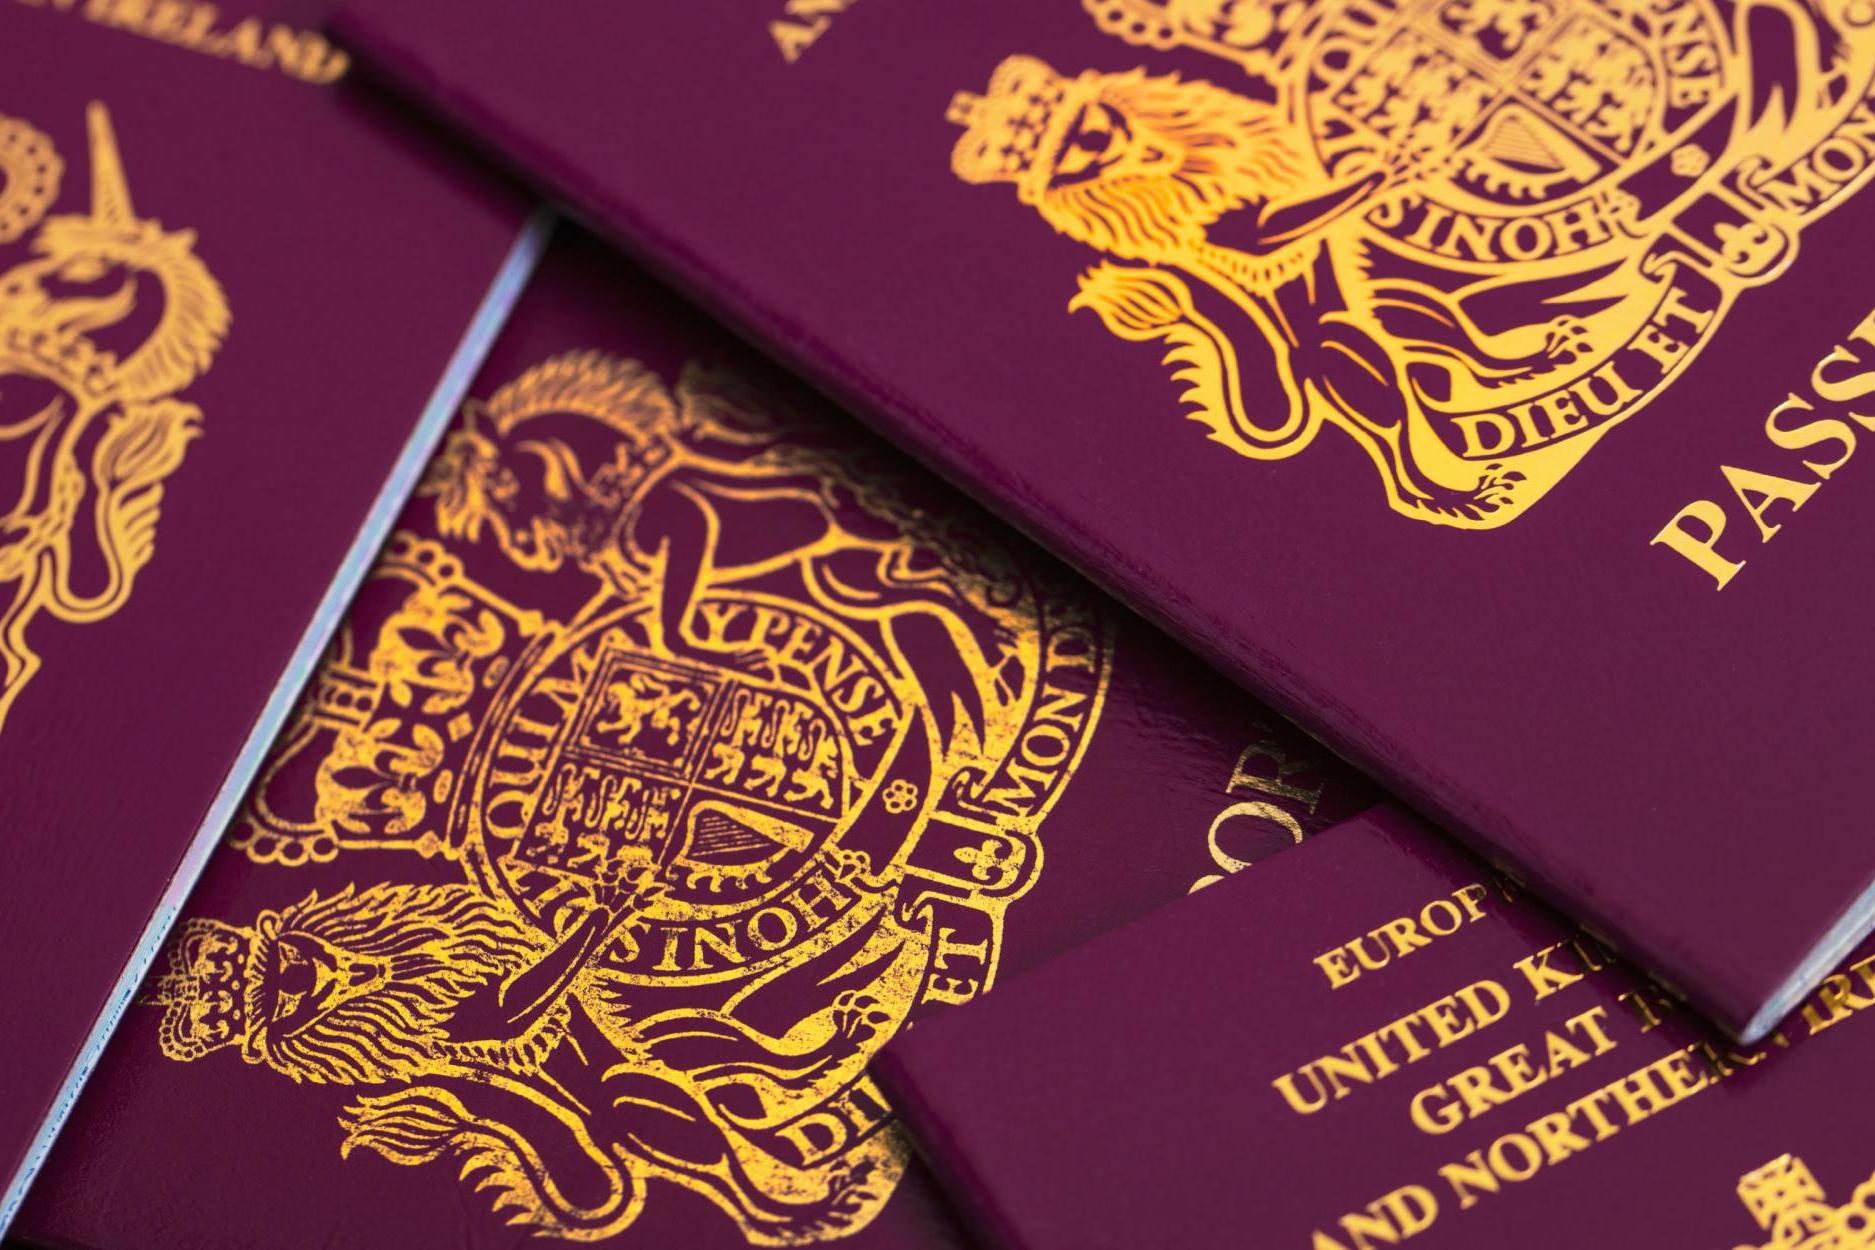 Applying for British citizenship is an expensive business